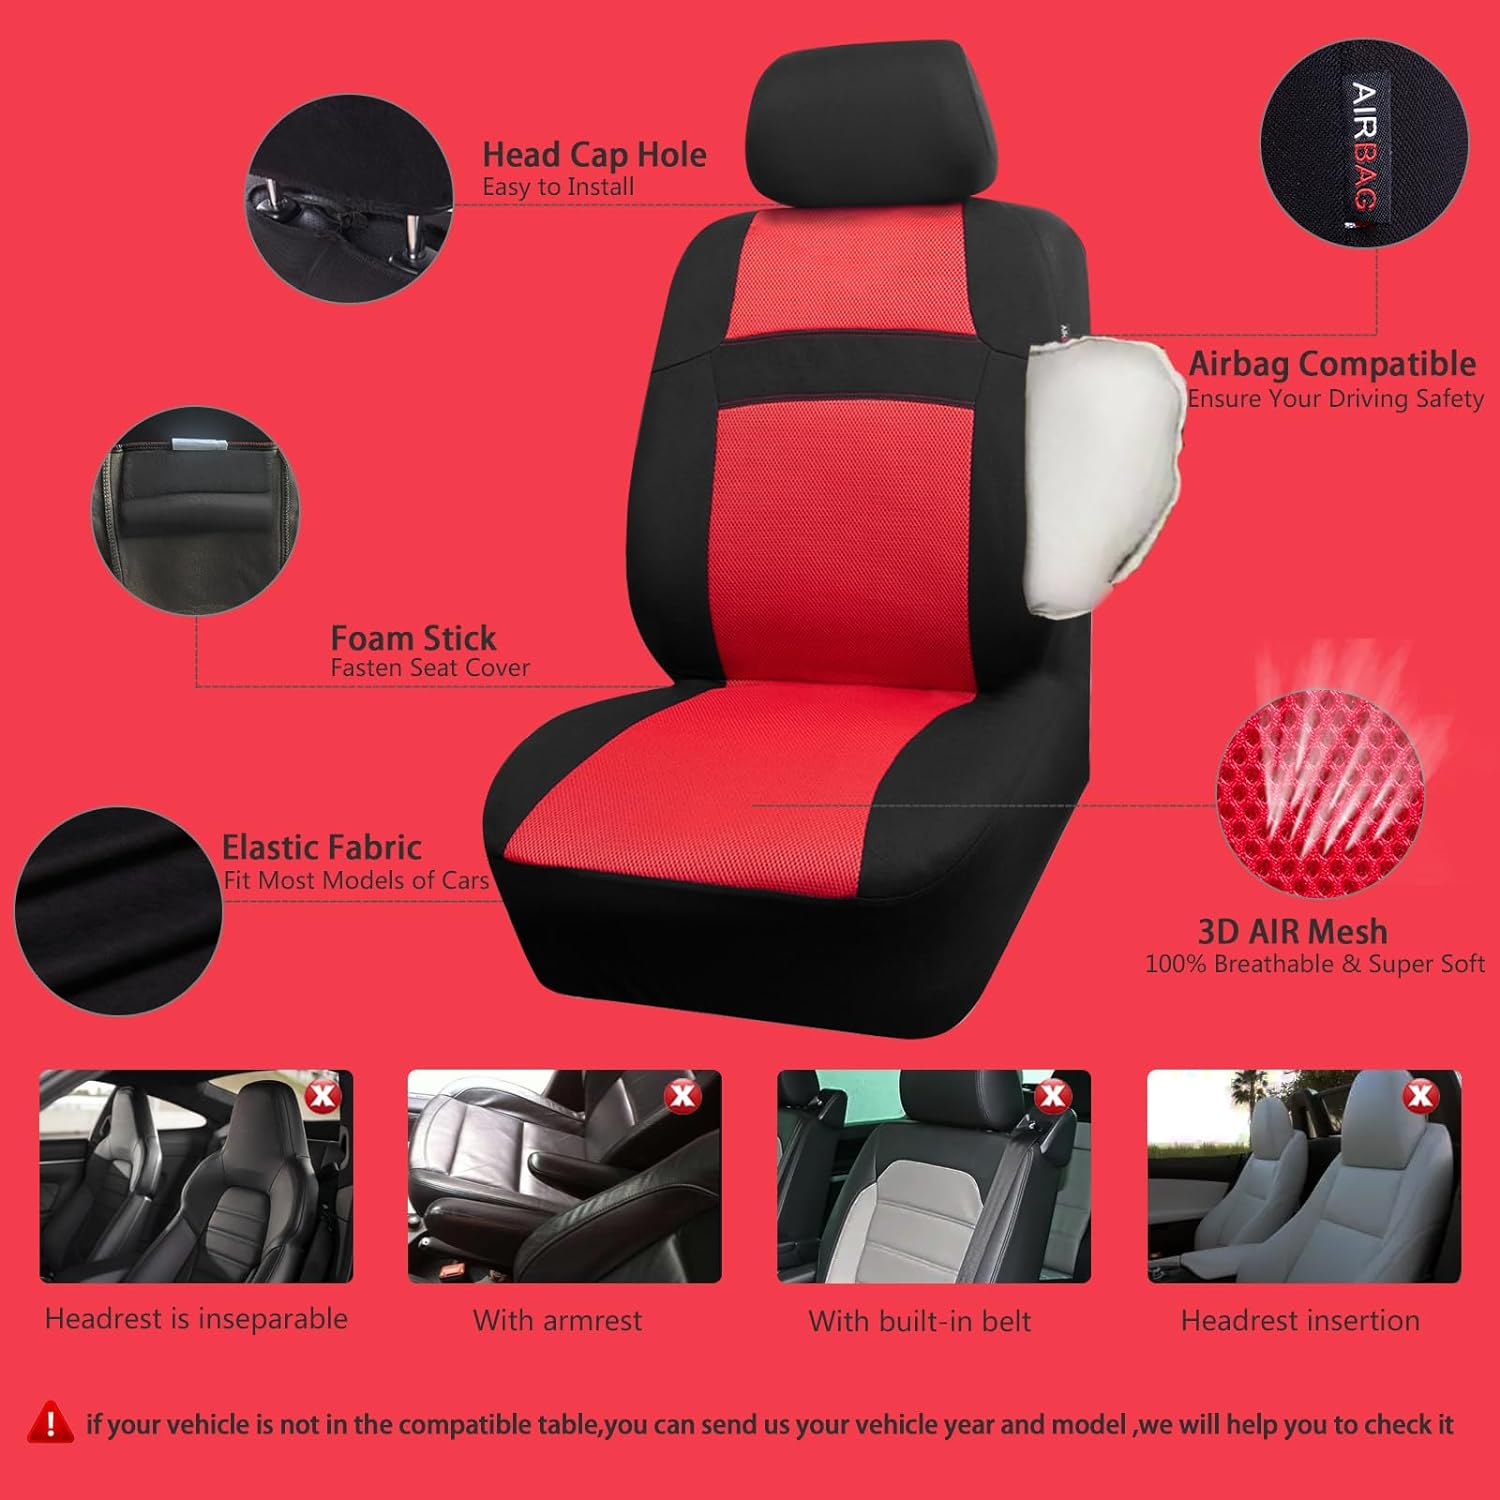 CAR PASS Leather Steering Wheel Cover, Waterproof Car Floor Mats and 3D Air Seat Covers Front Seats Only Universal Fit for SUV,Vans,sedans, Trucks, Automotive Interior Covers (Black＆Red)